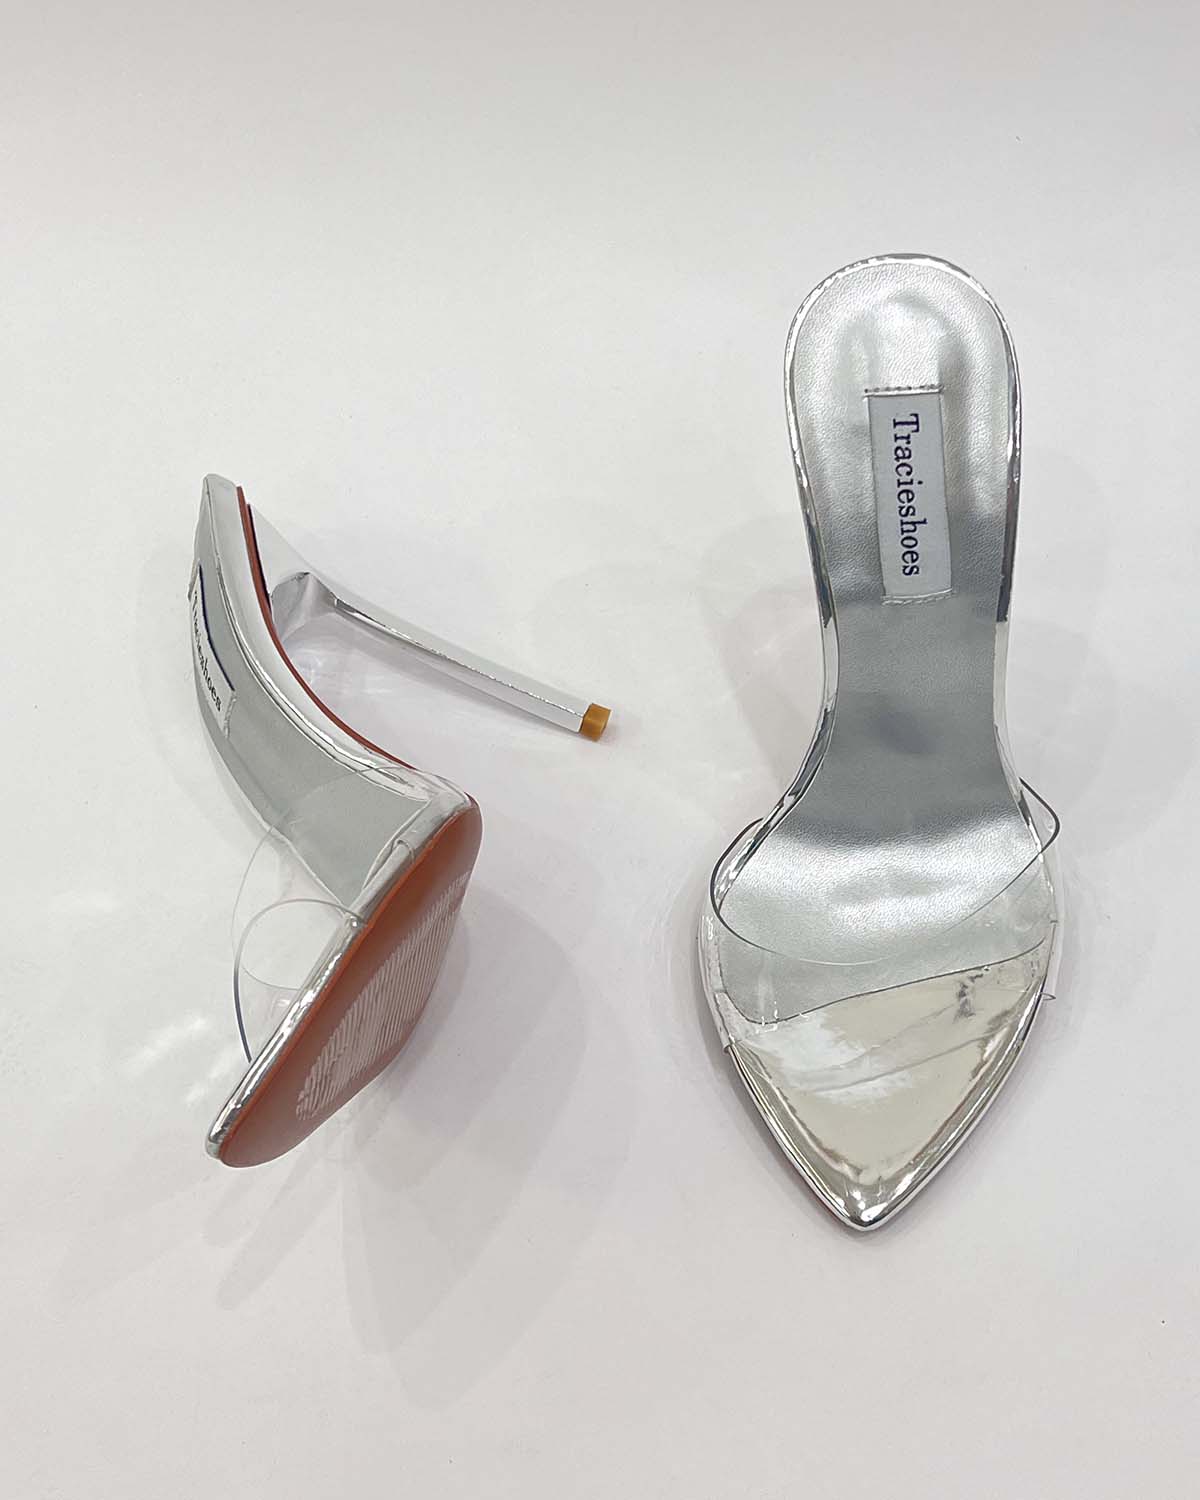 Clear PVC metal leather pointed toe heels sandals